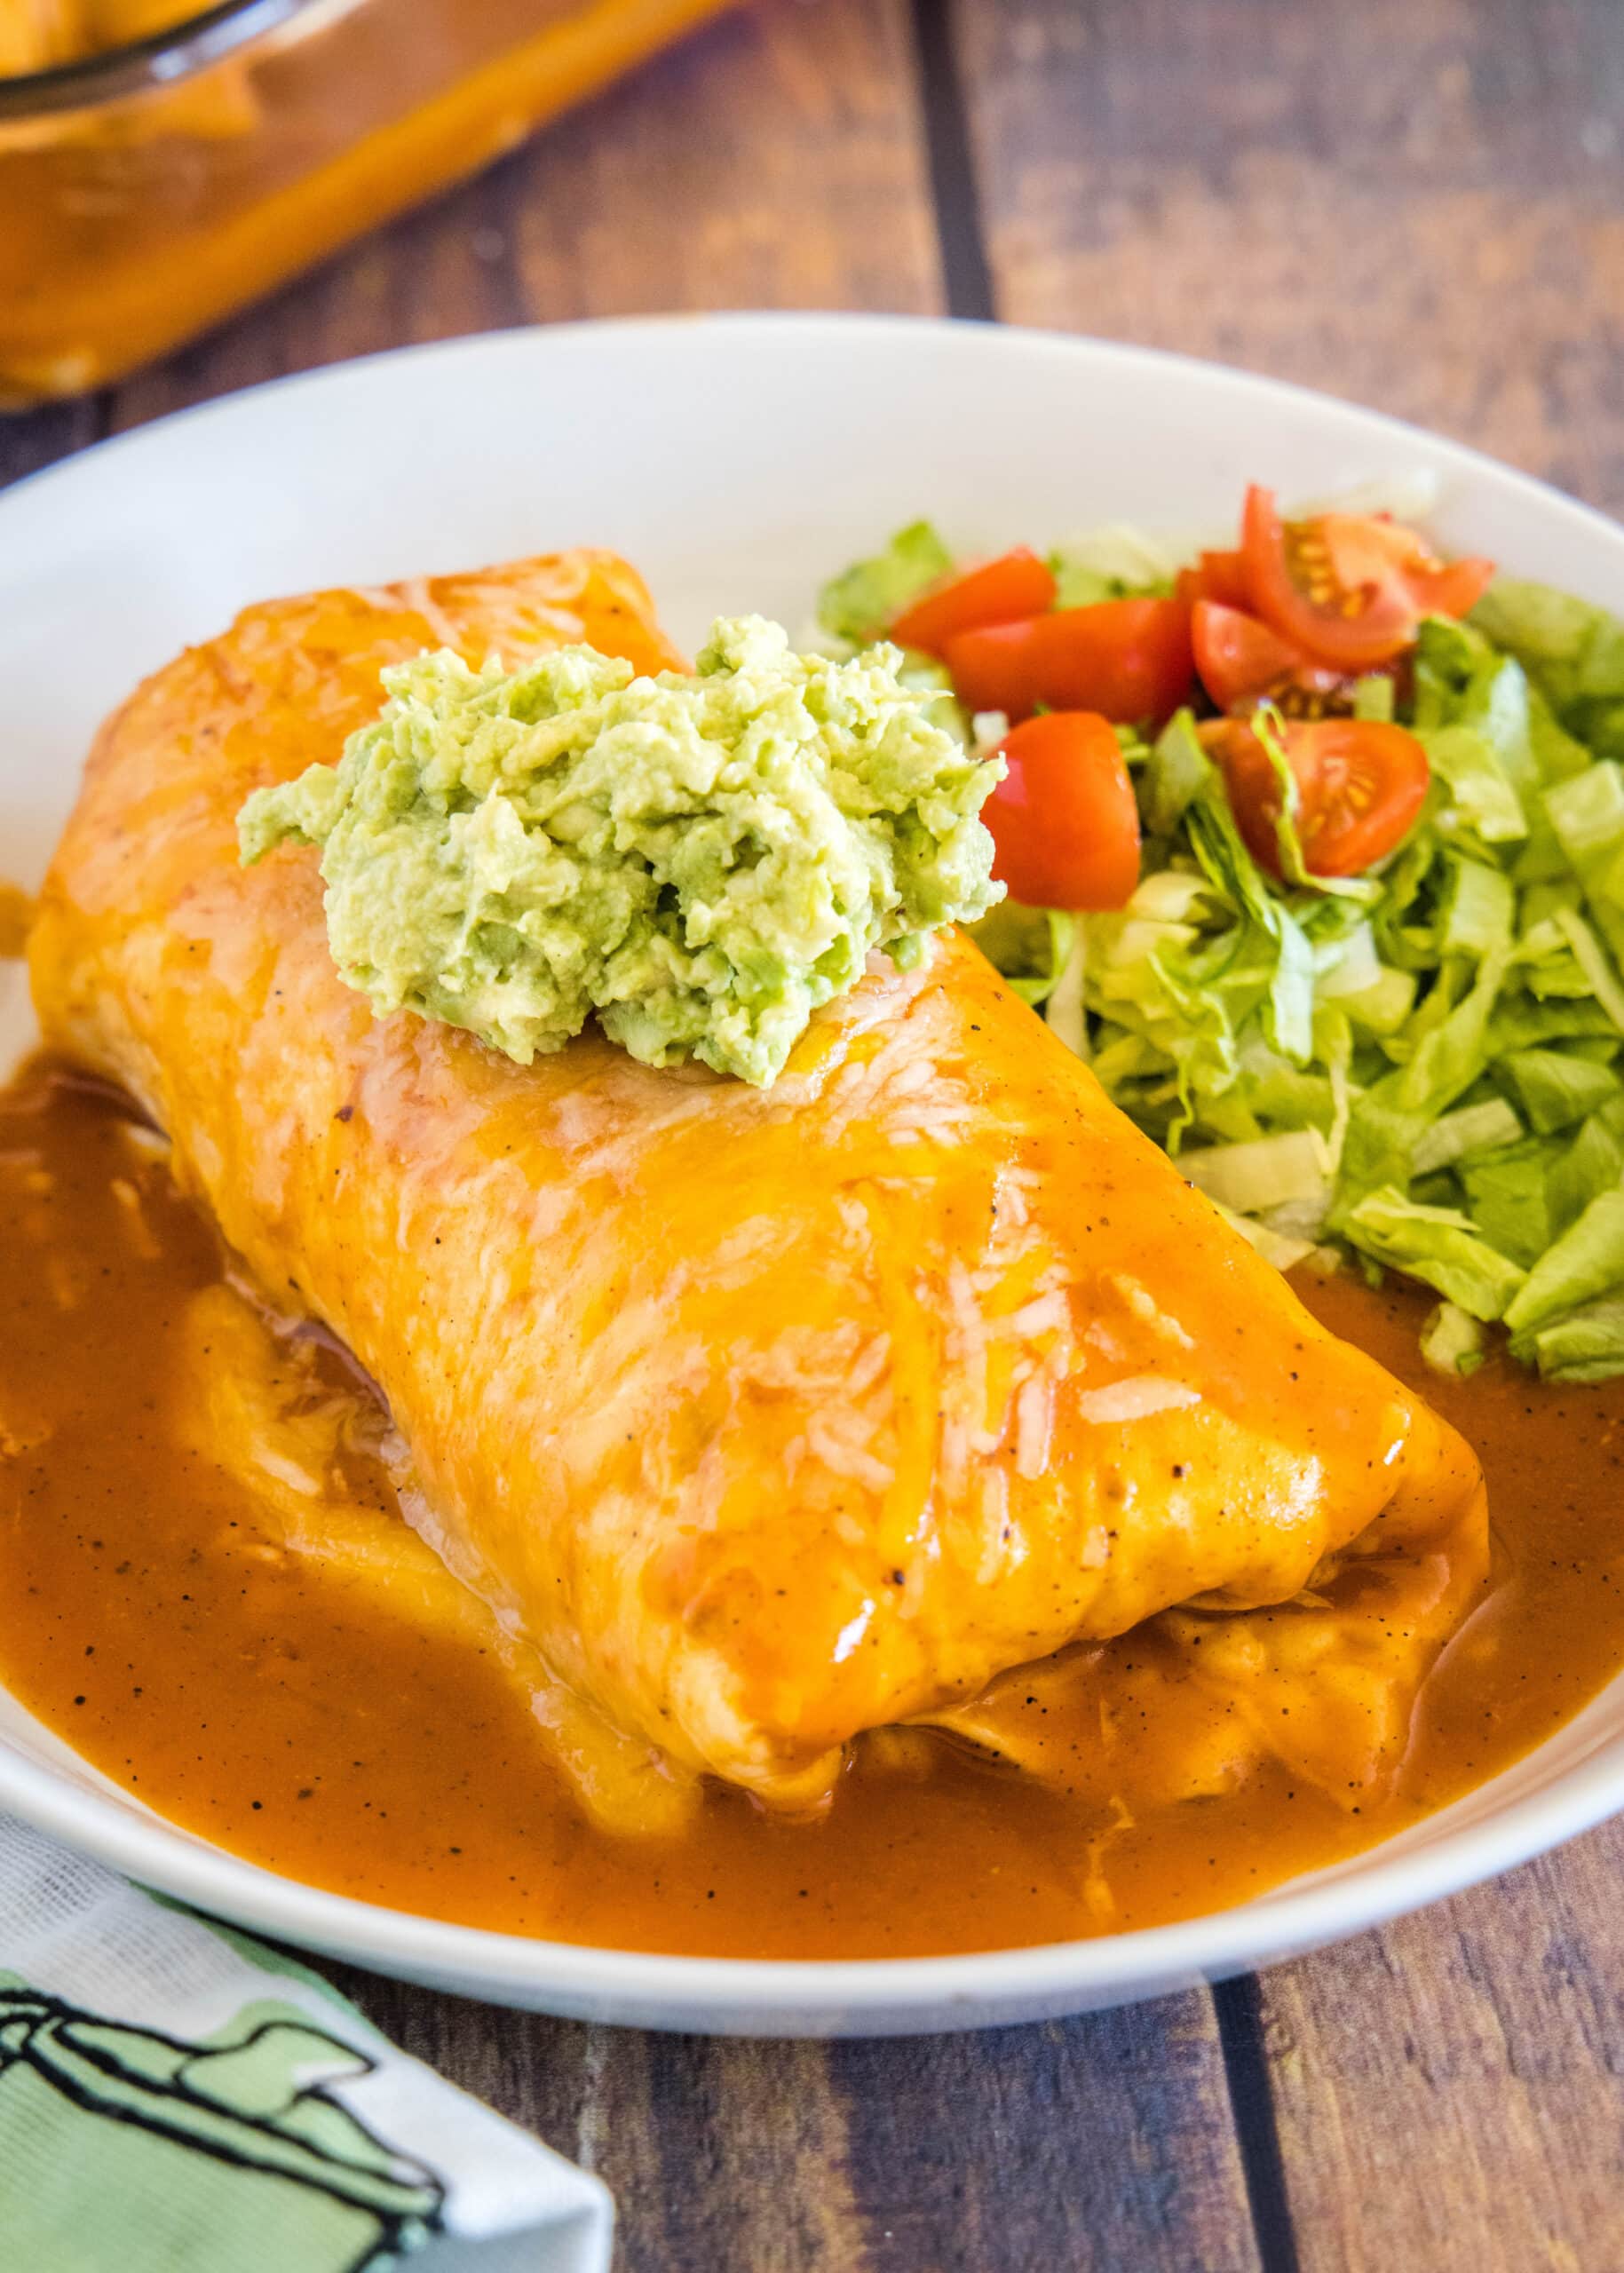 A wet burrito on a white plate, topped with guacamole, next to lettuce and tomatoes